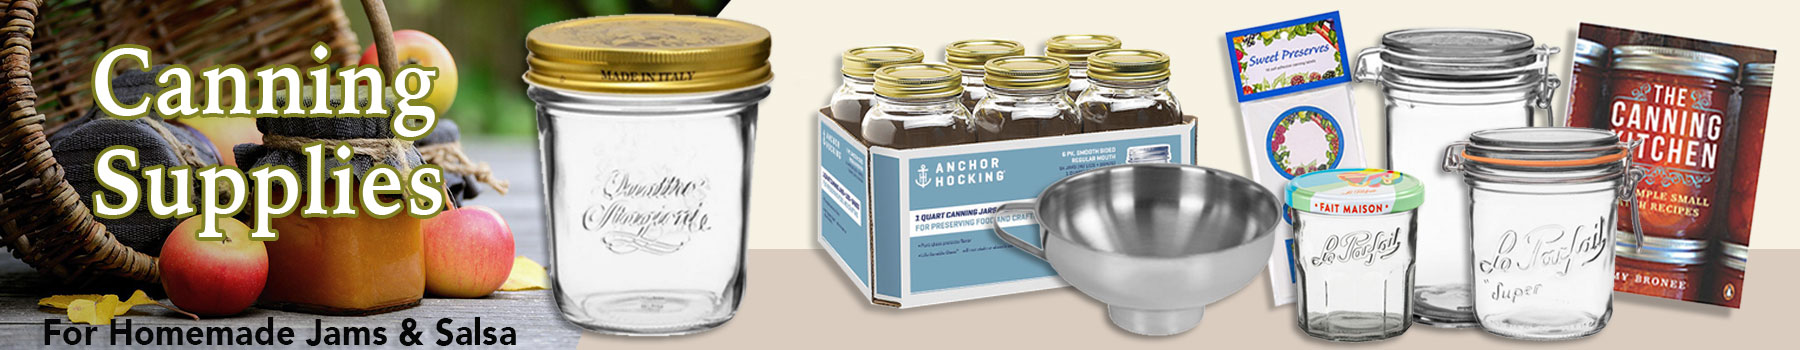 Canning Supplies in Stock with images of Canning Jars